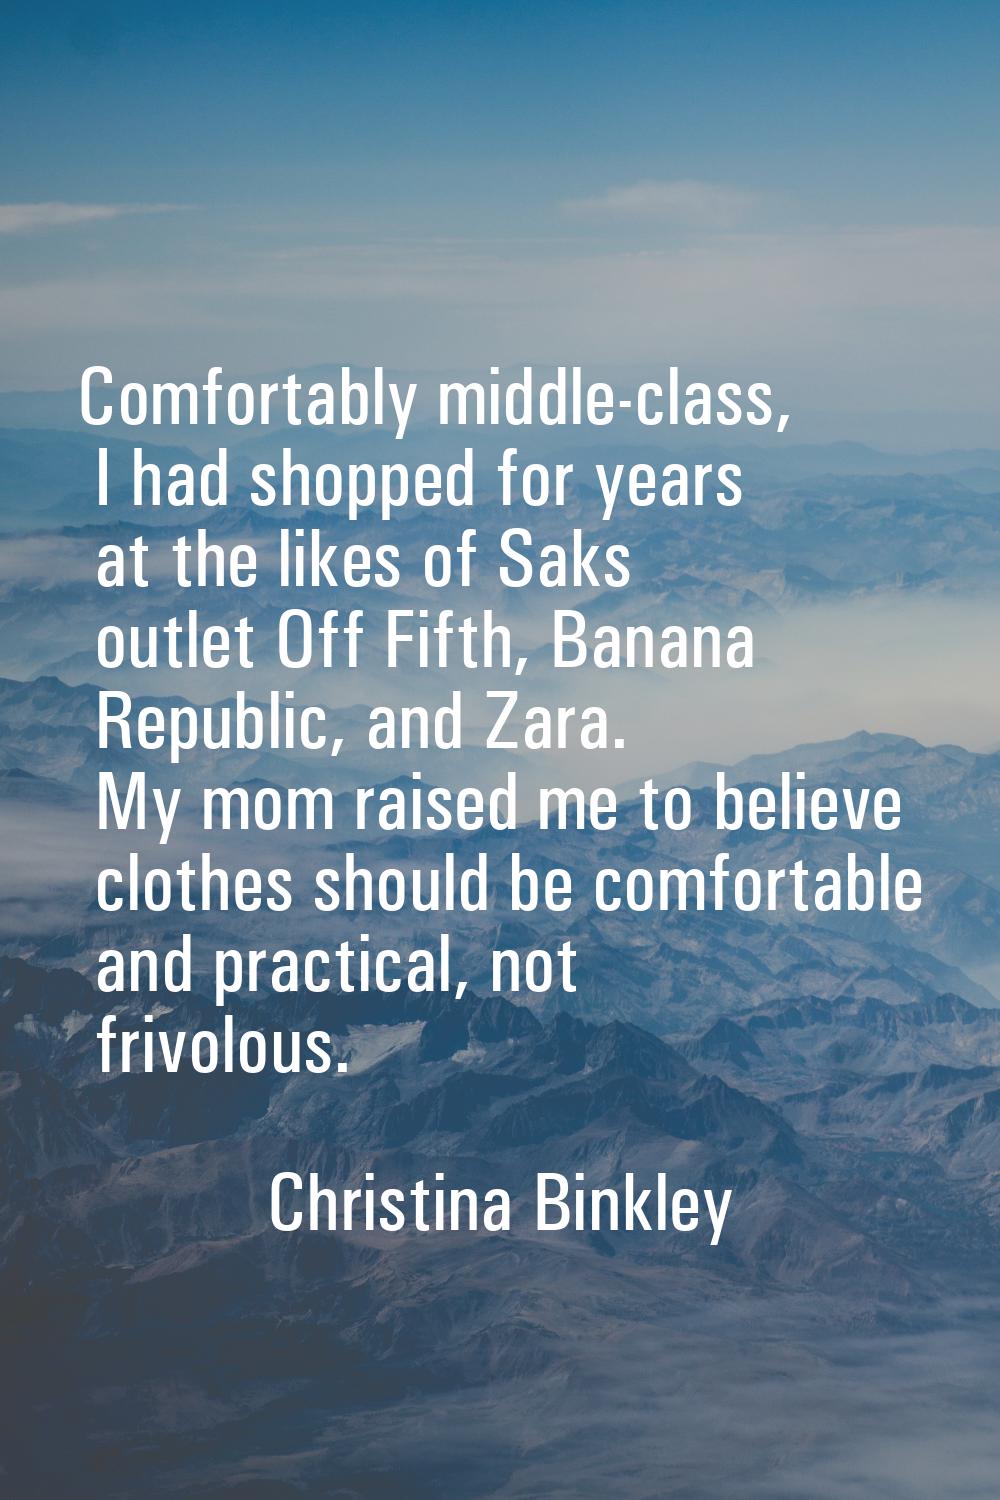 Comfortably middle-class, I had shopped for years at the likes of Saks outlet Off Fifth, Banana Rep